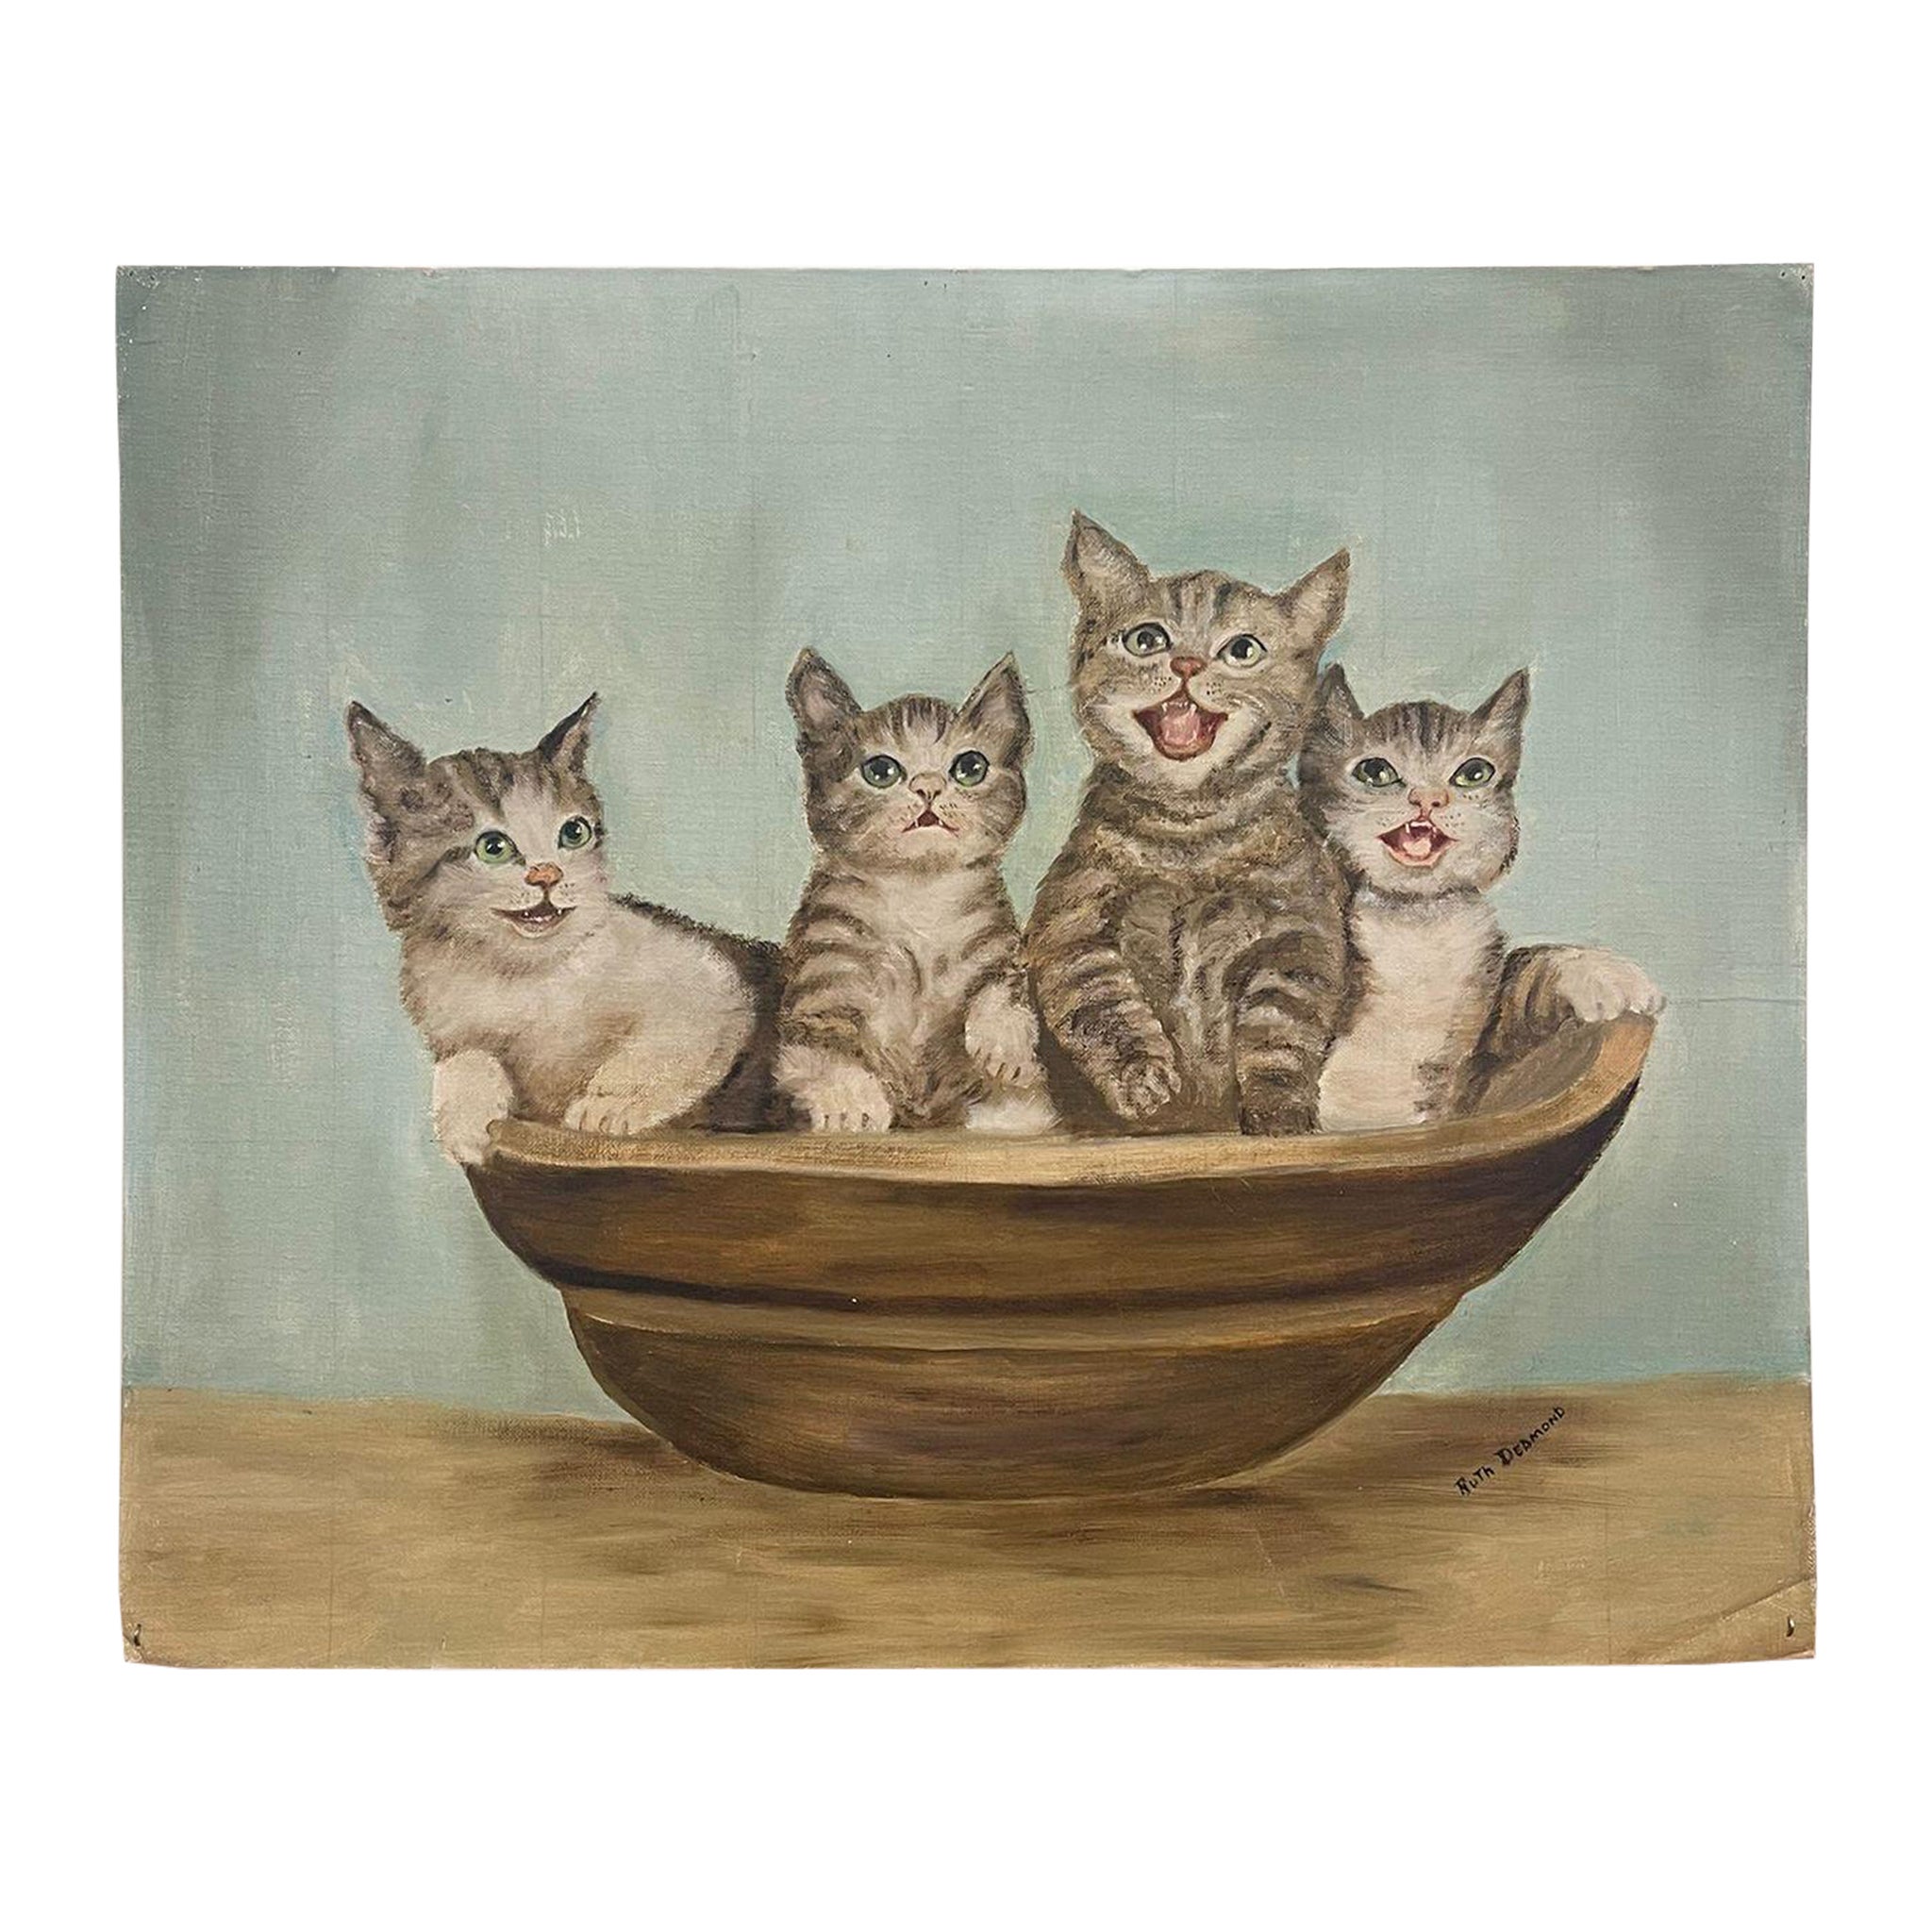 Vintage Signed Original Painting of Kittens in a Basket. For Sale